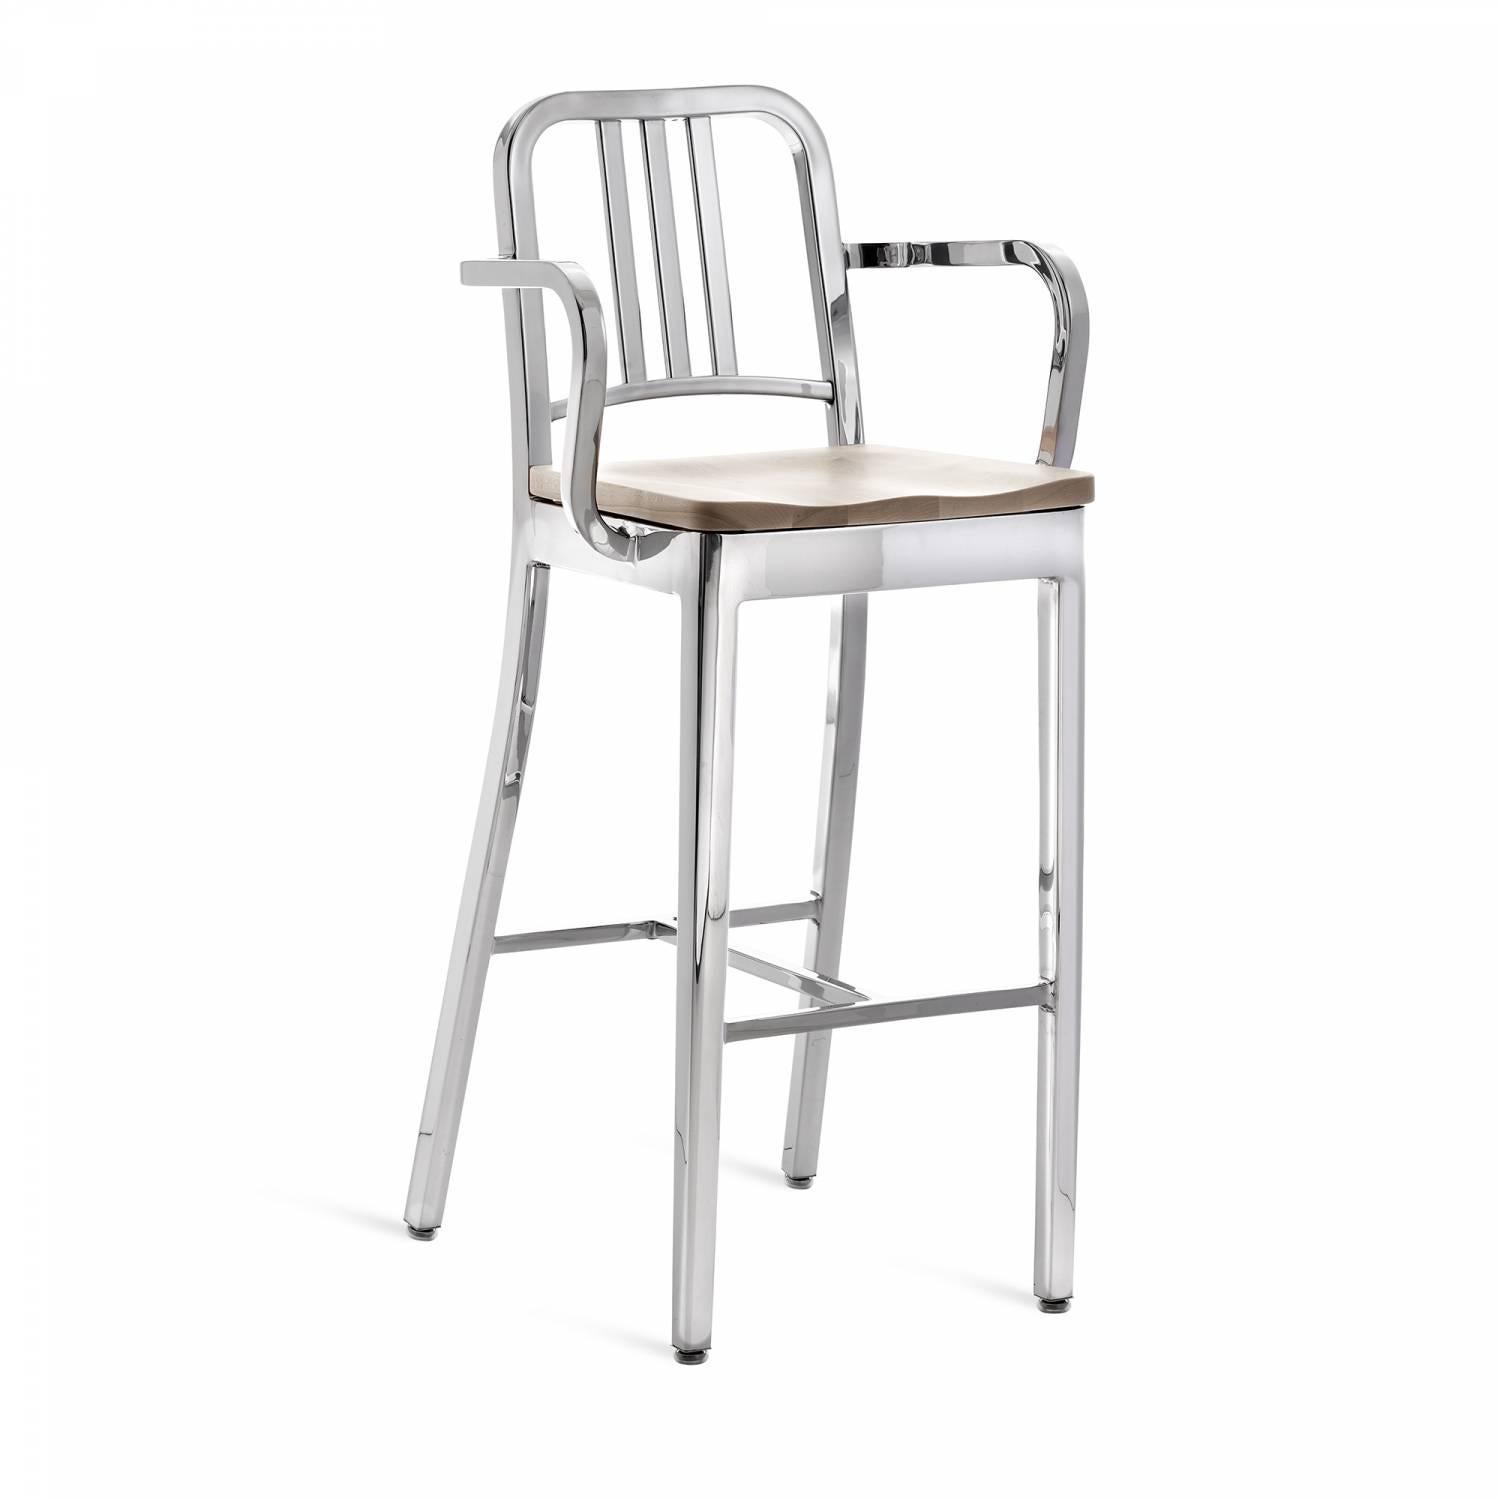 First built for use on submarines in 1944, the Navy Chair has been in continuous Production ever since. With the famous 77 step process, our craftsmen take soft, recycled aluminum, hand form and weld it- then temper it for strength. Finally, the